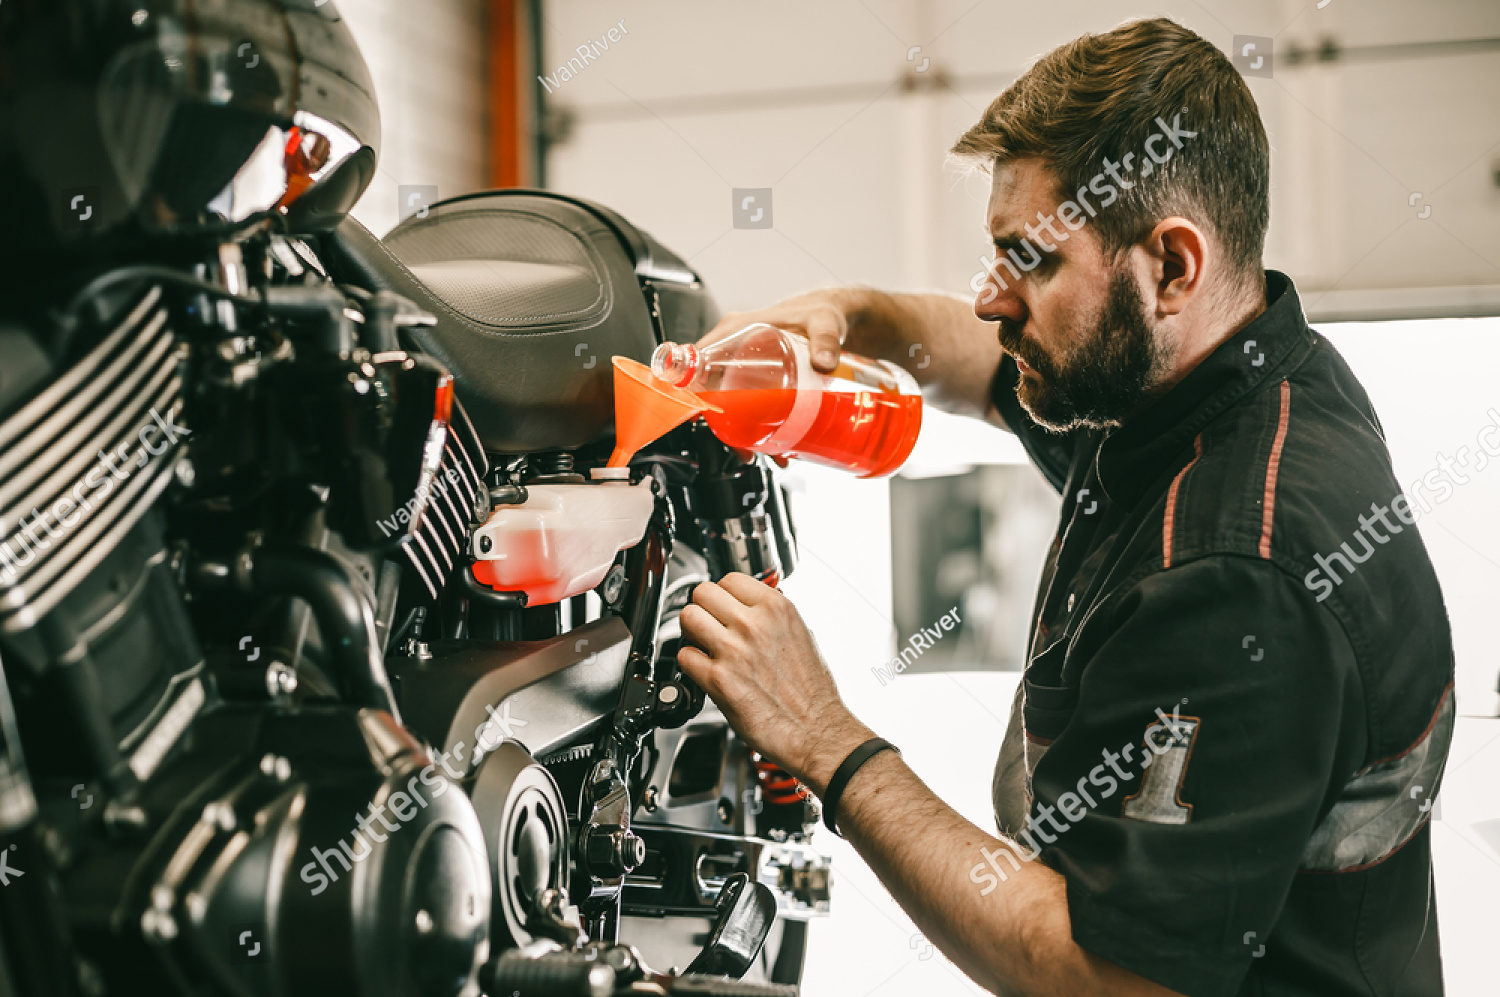 stock-photo-professional-mechanic-pouring-antifreeze-into-a-motorcycle-confident-young-man-repairing-668524327